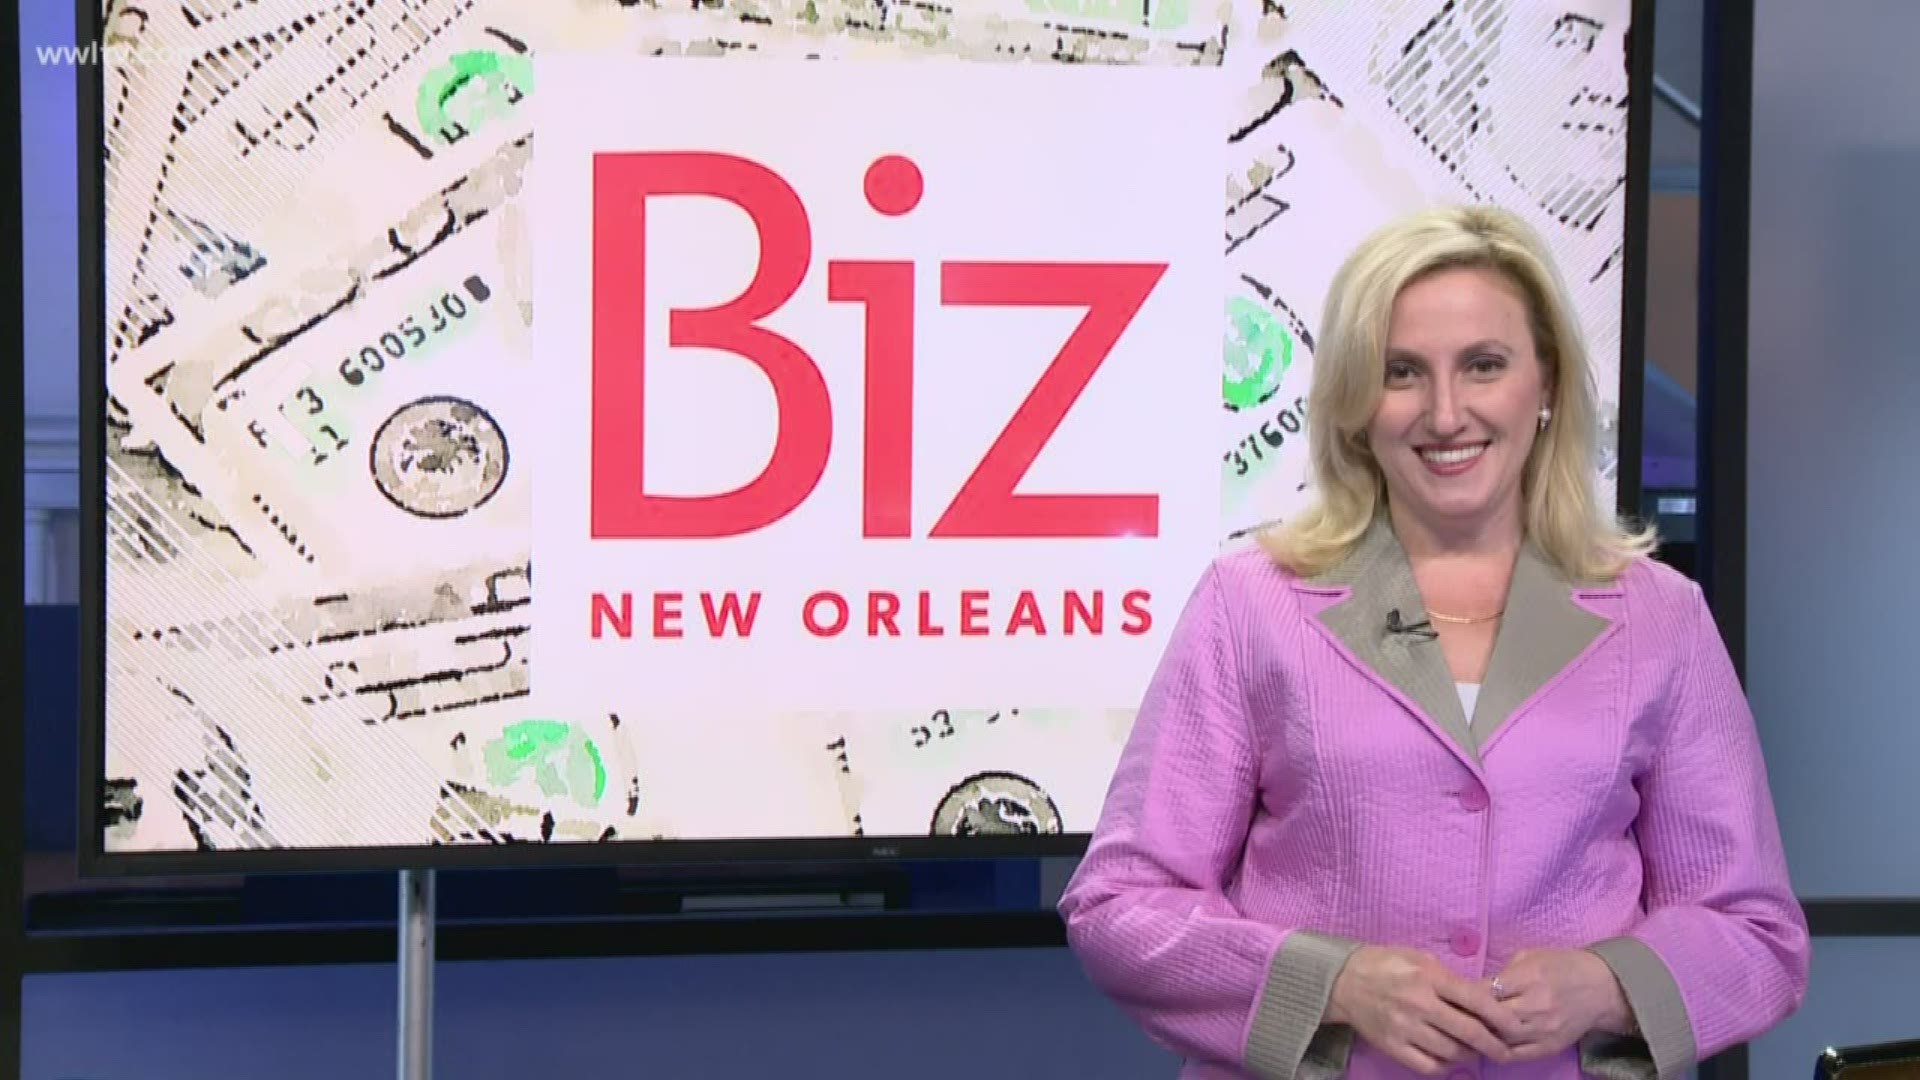 Do you ever think about how your life may be different after signing the deed to your newly-purchased home? BizNewOrleans.com's Leslie Snadowsky says once you get the keys, your life may never be the same again.